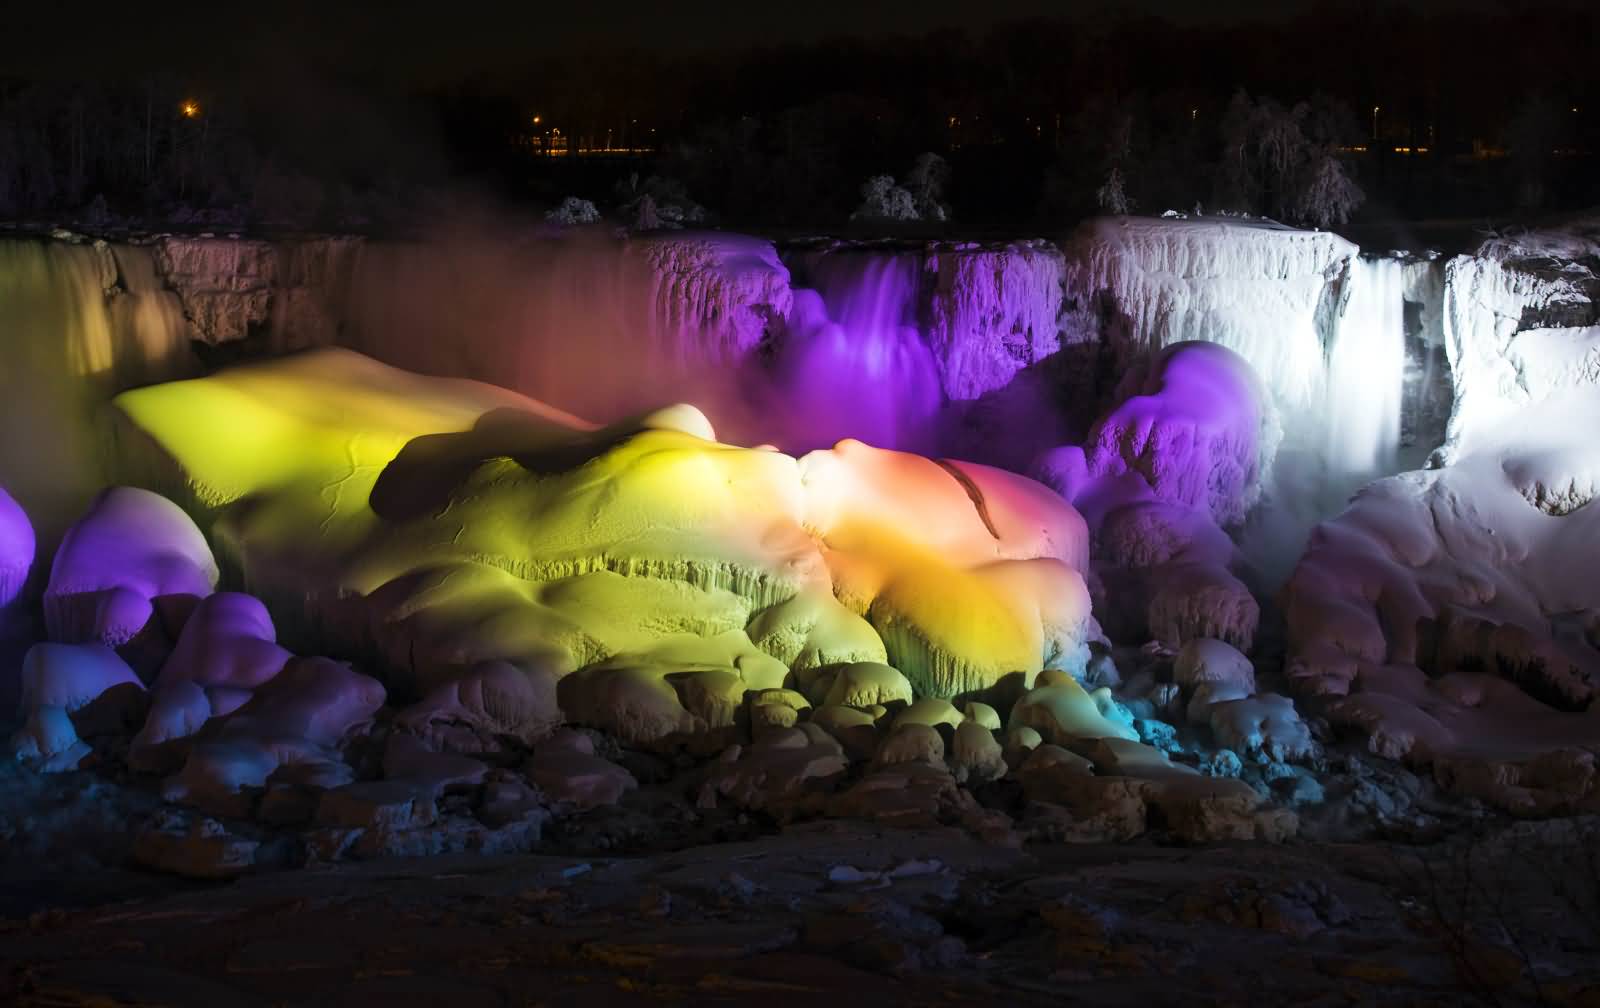 Partially Frozen Niagara Falls Seen On The American Side With Night Lights